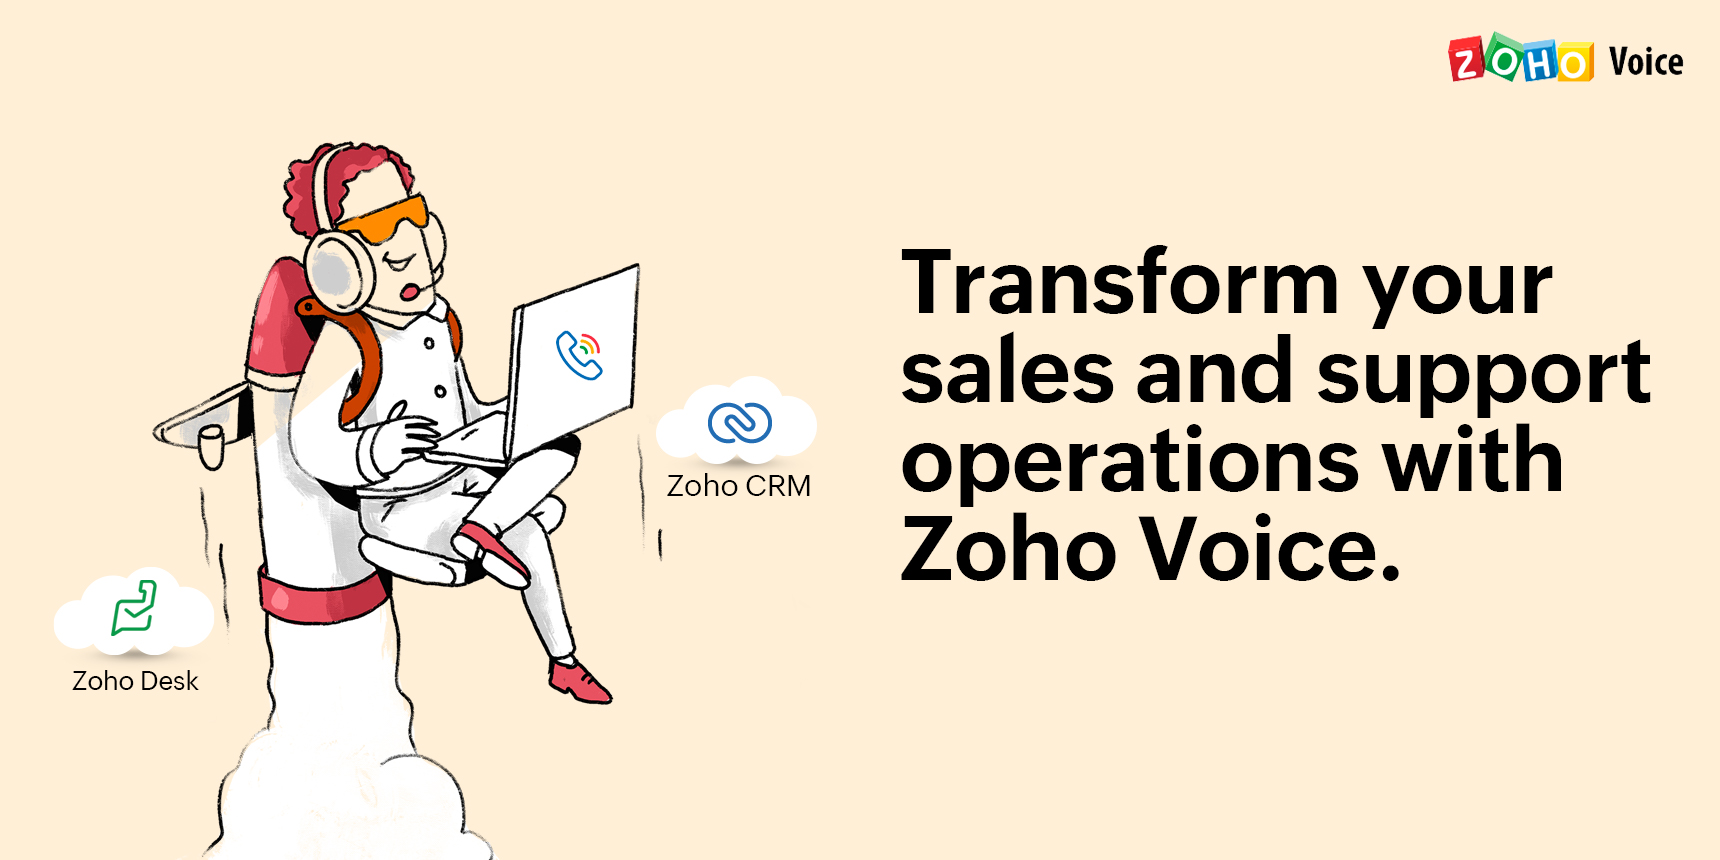 Zoho Voice places a phone system inside Zoho CRM and Desk